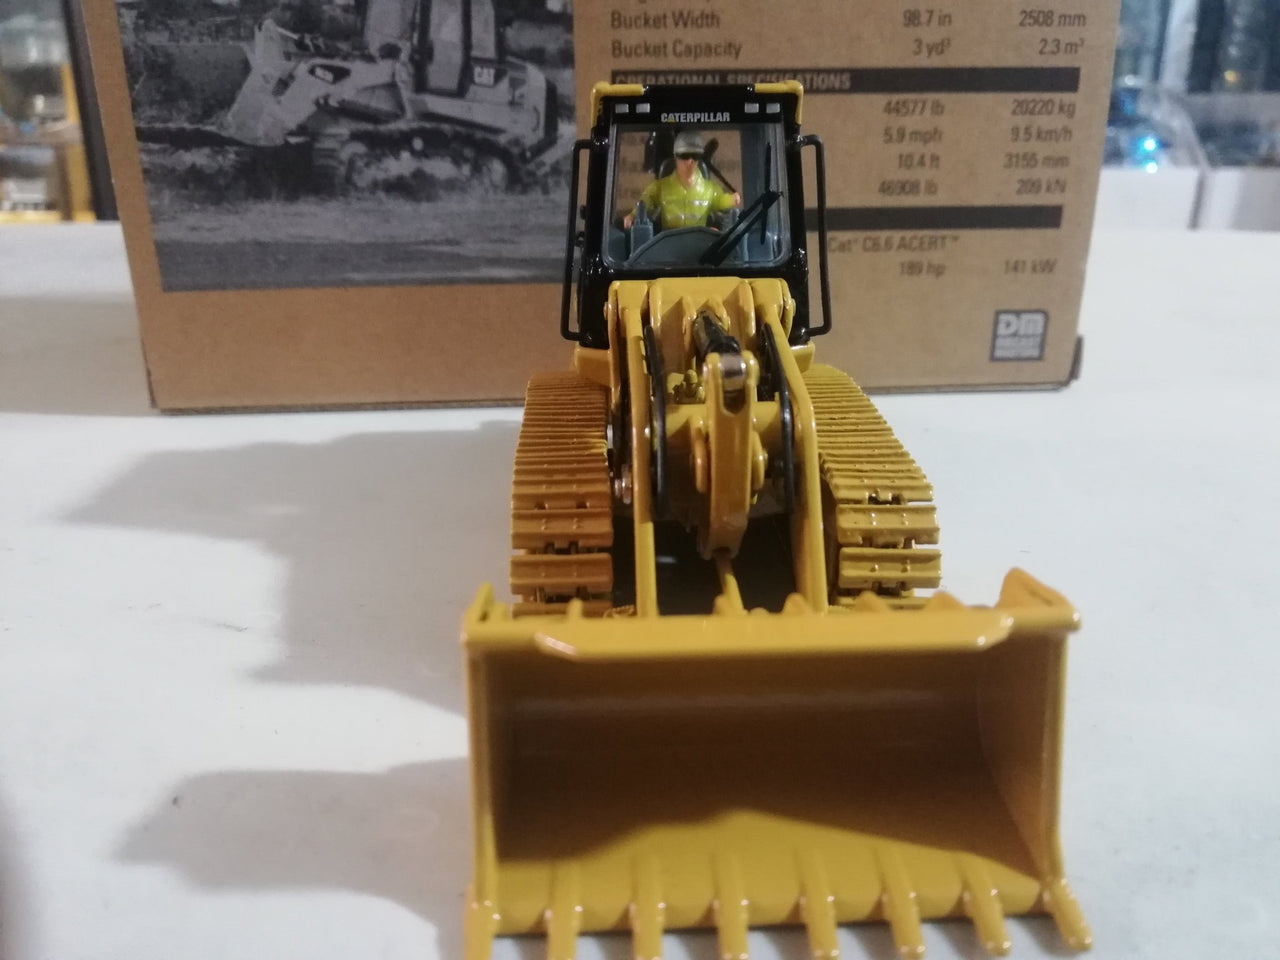 85194 Caterpillar 963D Track Loader 1:50 Scale (Discontinued Model)